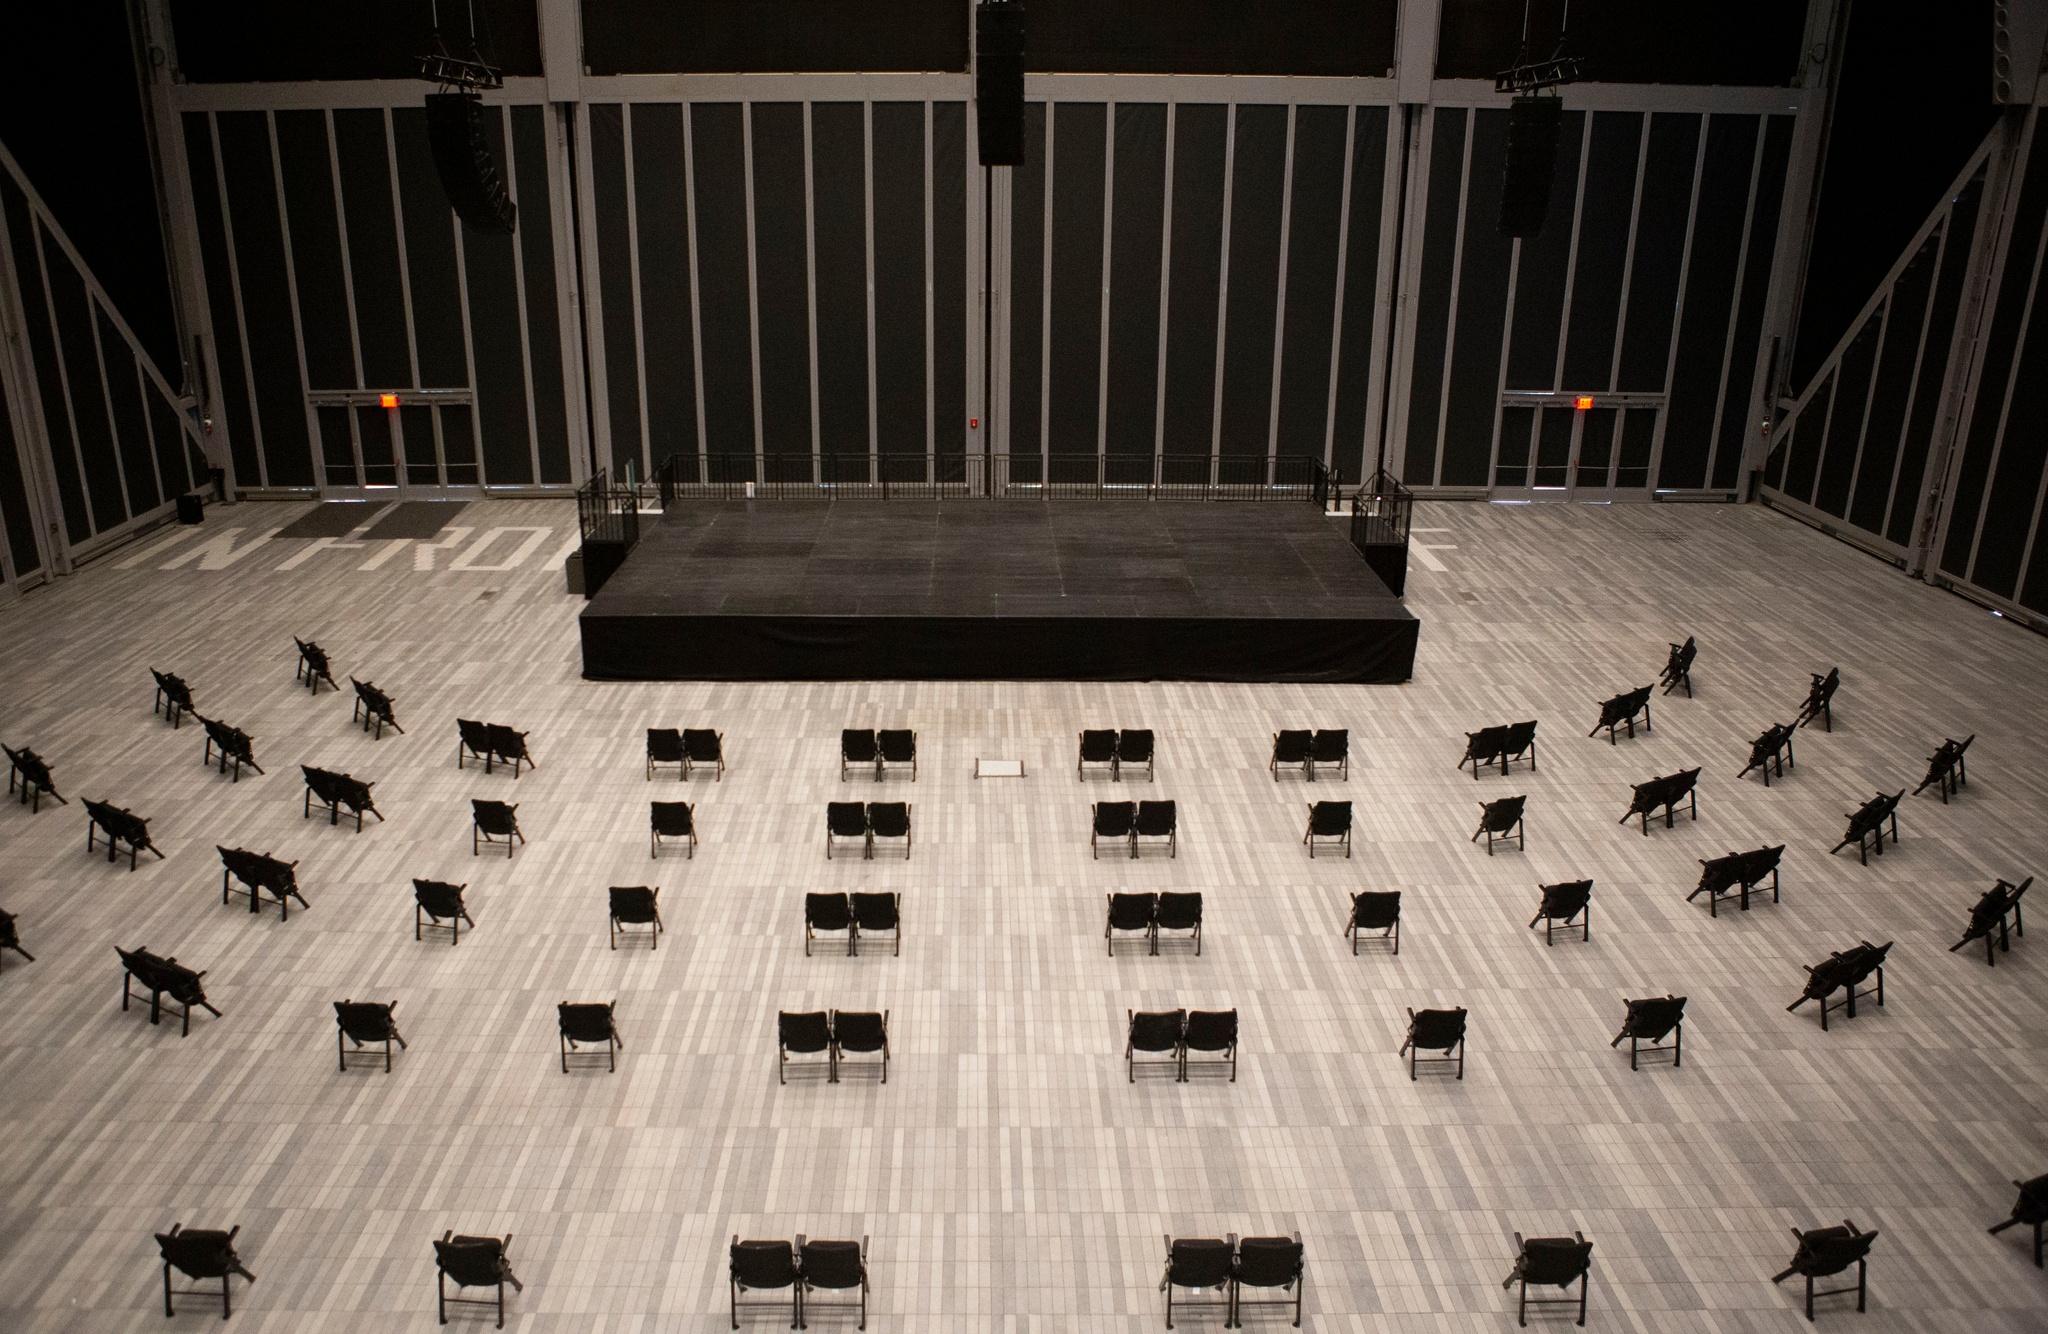 The large McCourt performance space with black shades drawn over the windows and a simple black stage positioned before five rows of chairs socially distanced in pods of one or two chairs.